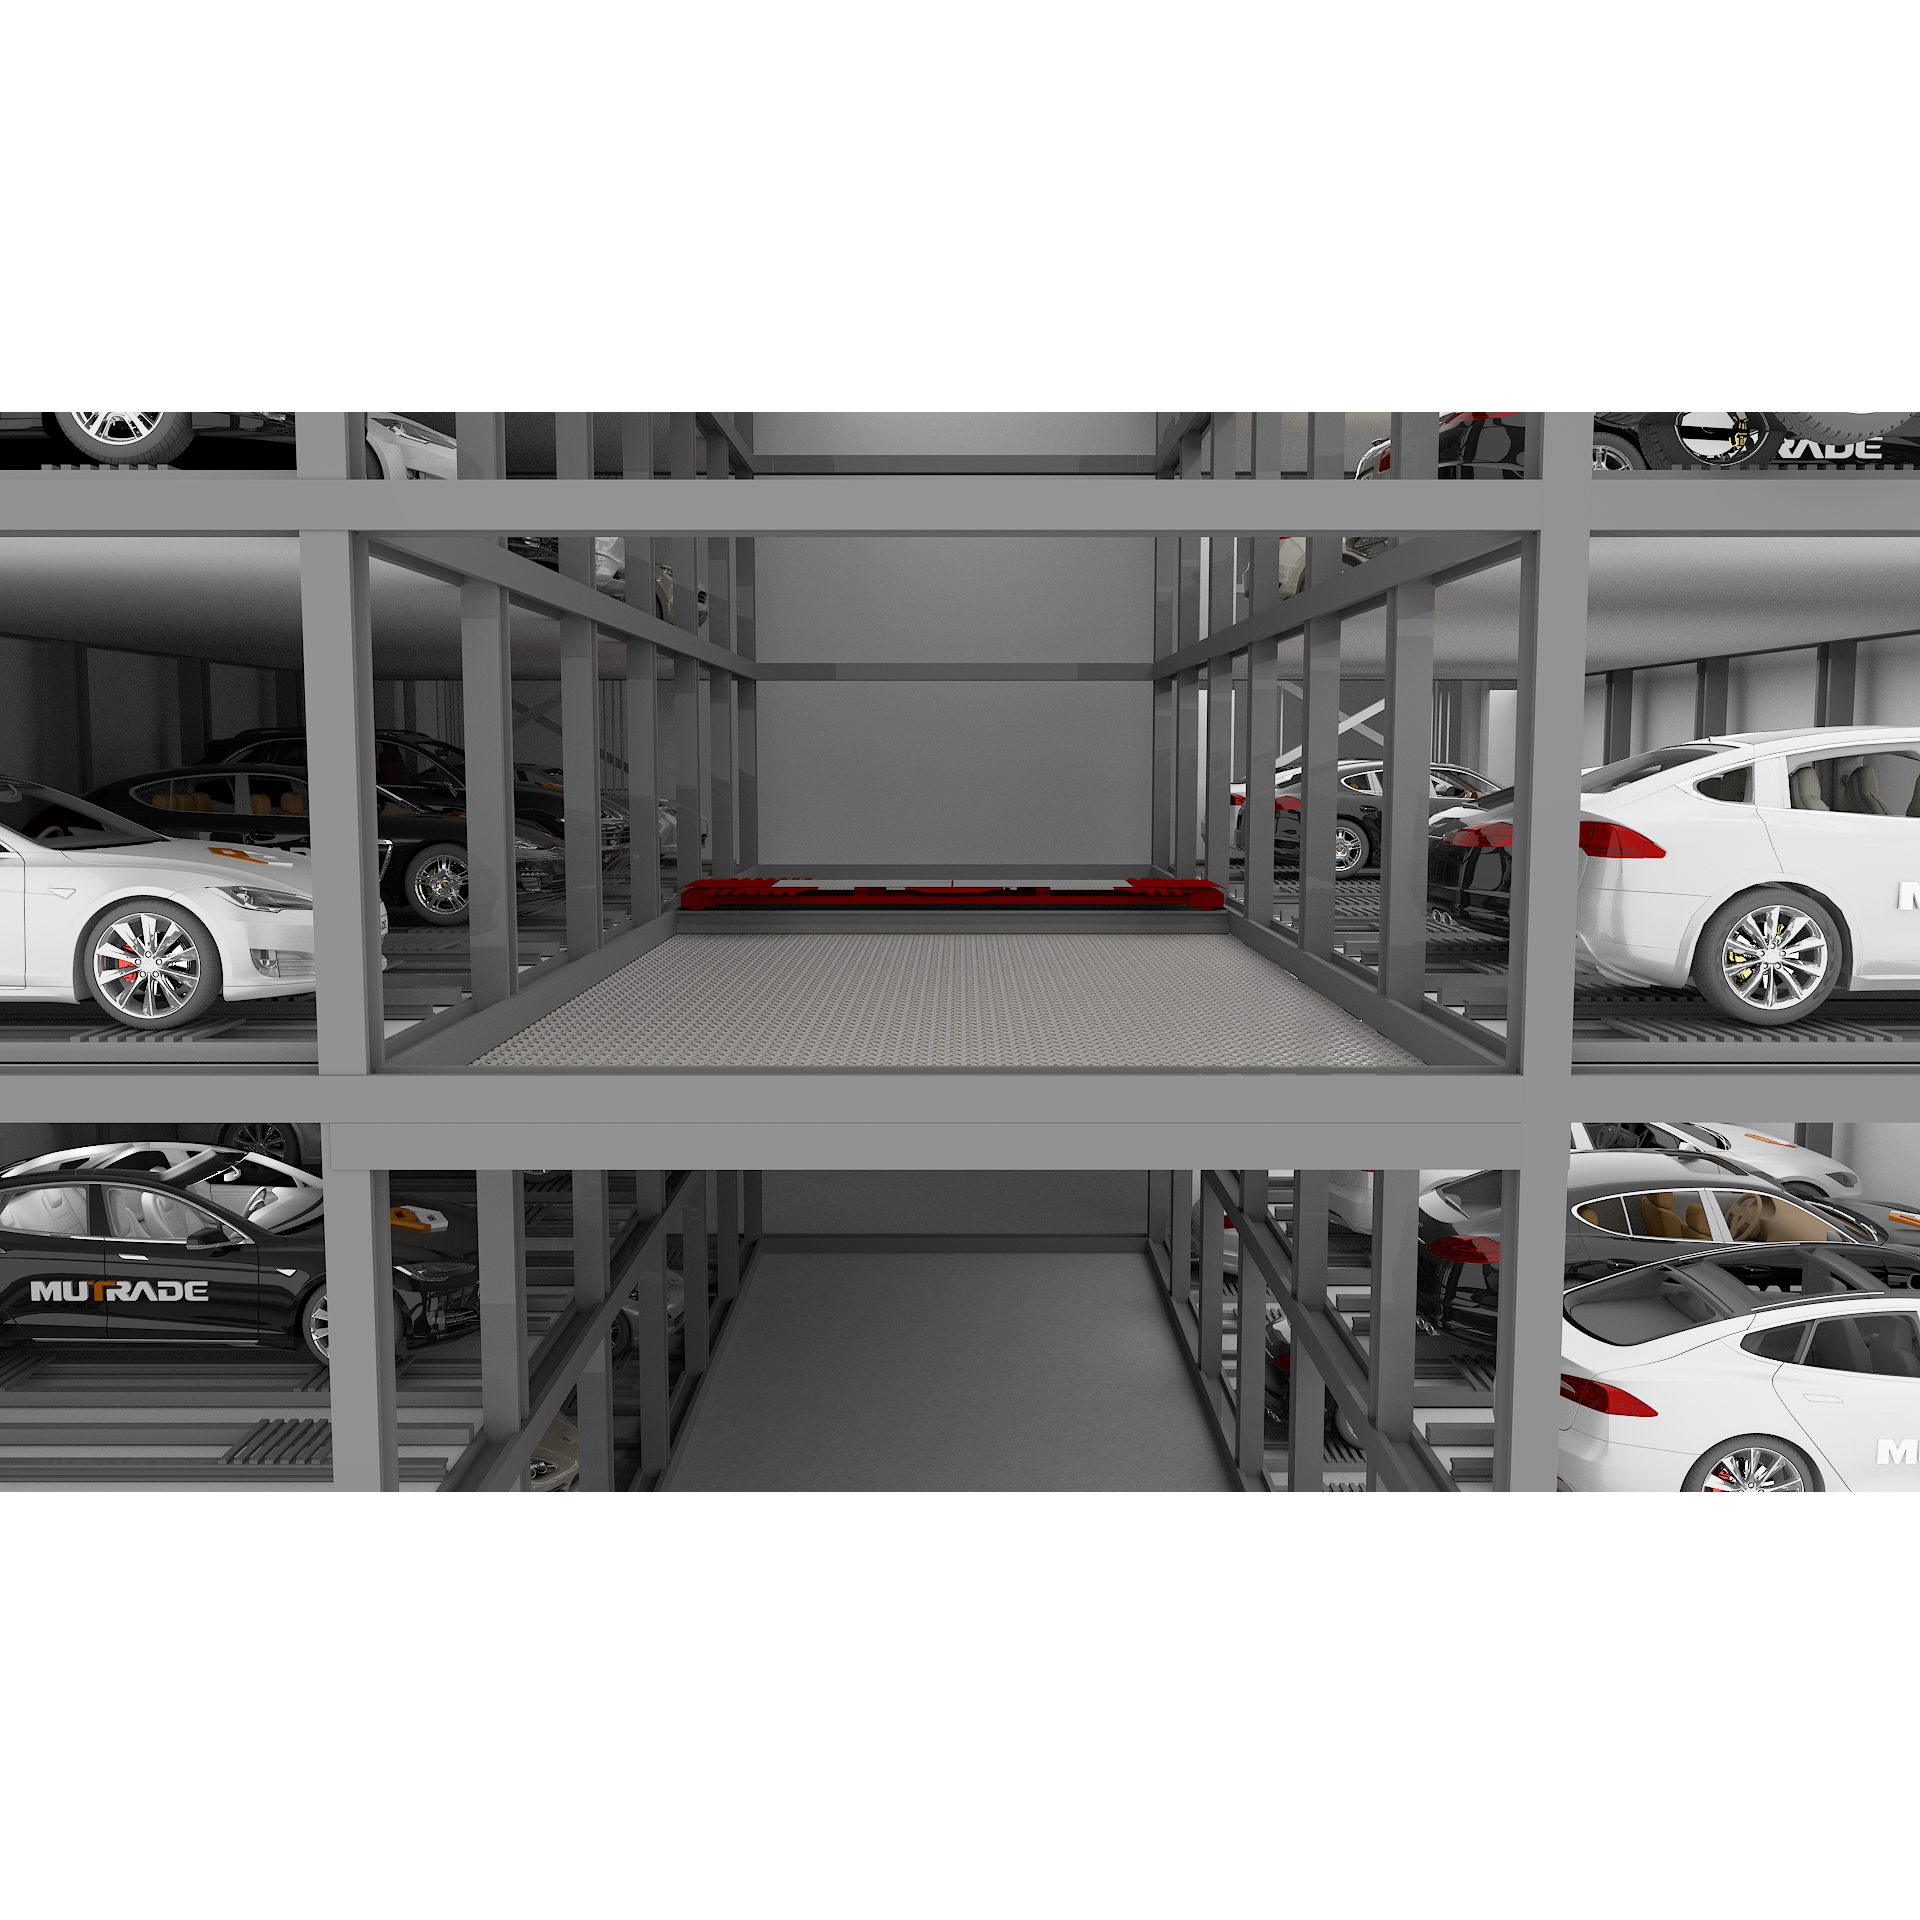 Automated Cabinet Parking System